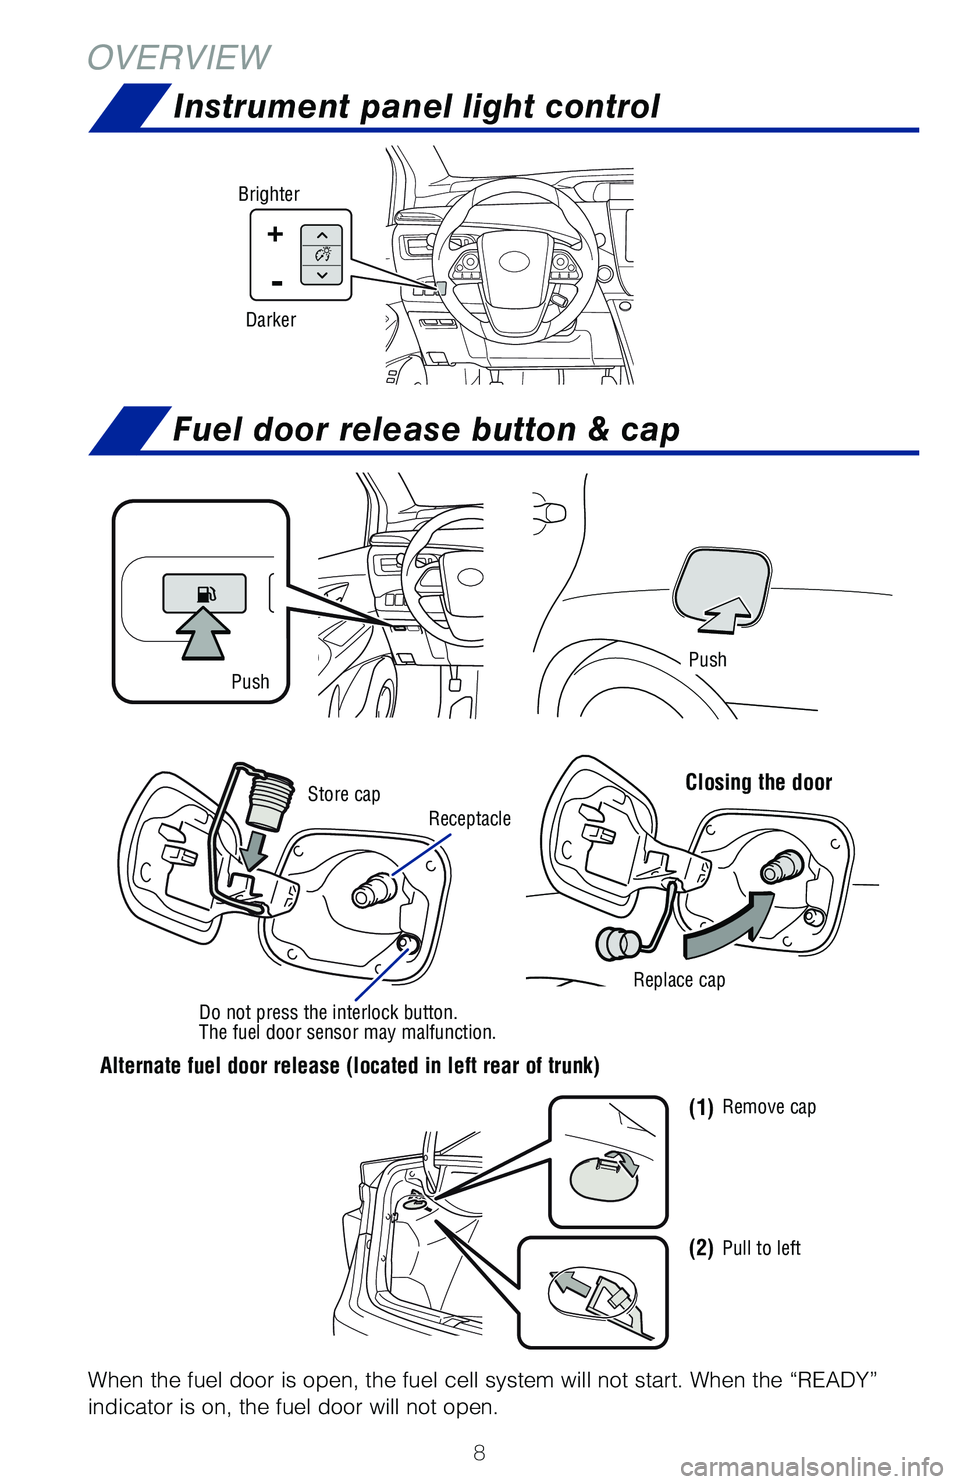 TOYOTA MIRAI 2020  Owners Manual (in English) 8
OVERVIEW
When the fuel door is open, the fuel cell system will not start. When the “READY” 
indicator is on, the fuel door will not open.
PushPush
Store capReplace cap
Do not press the interlock